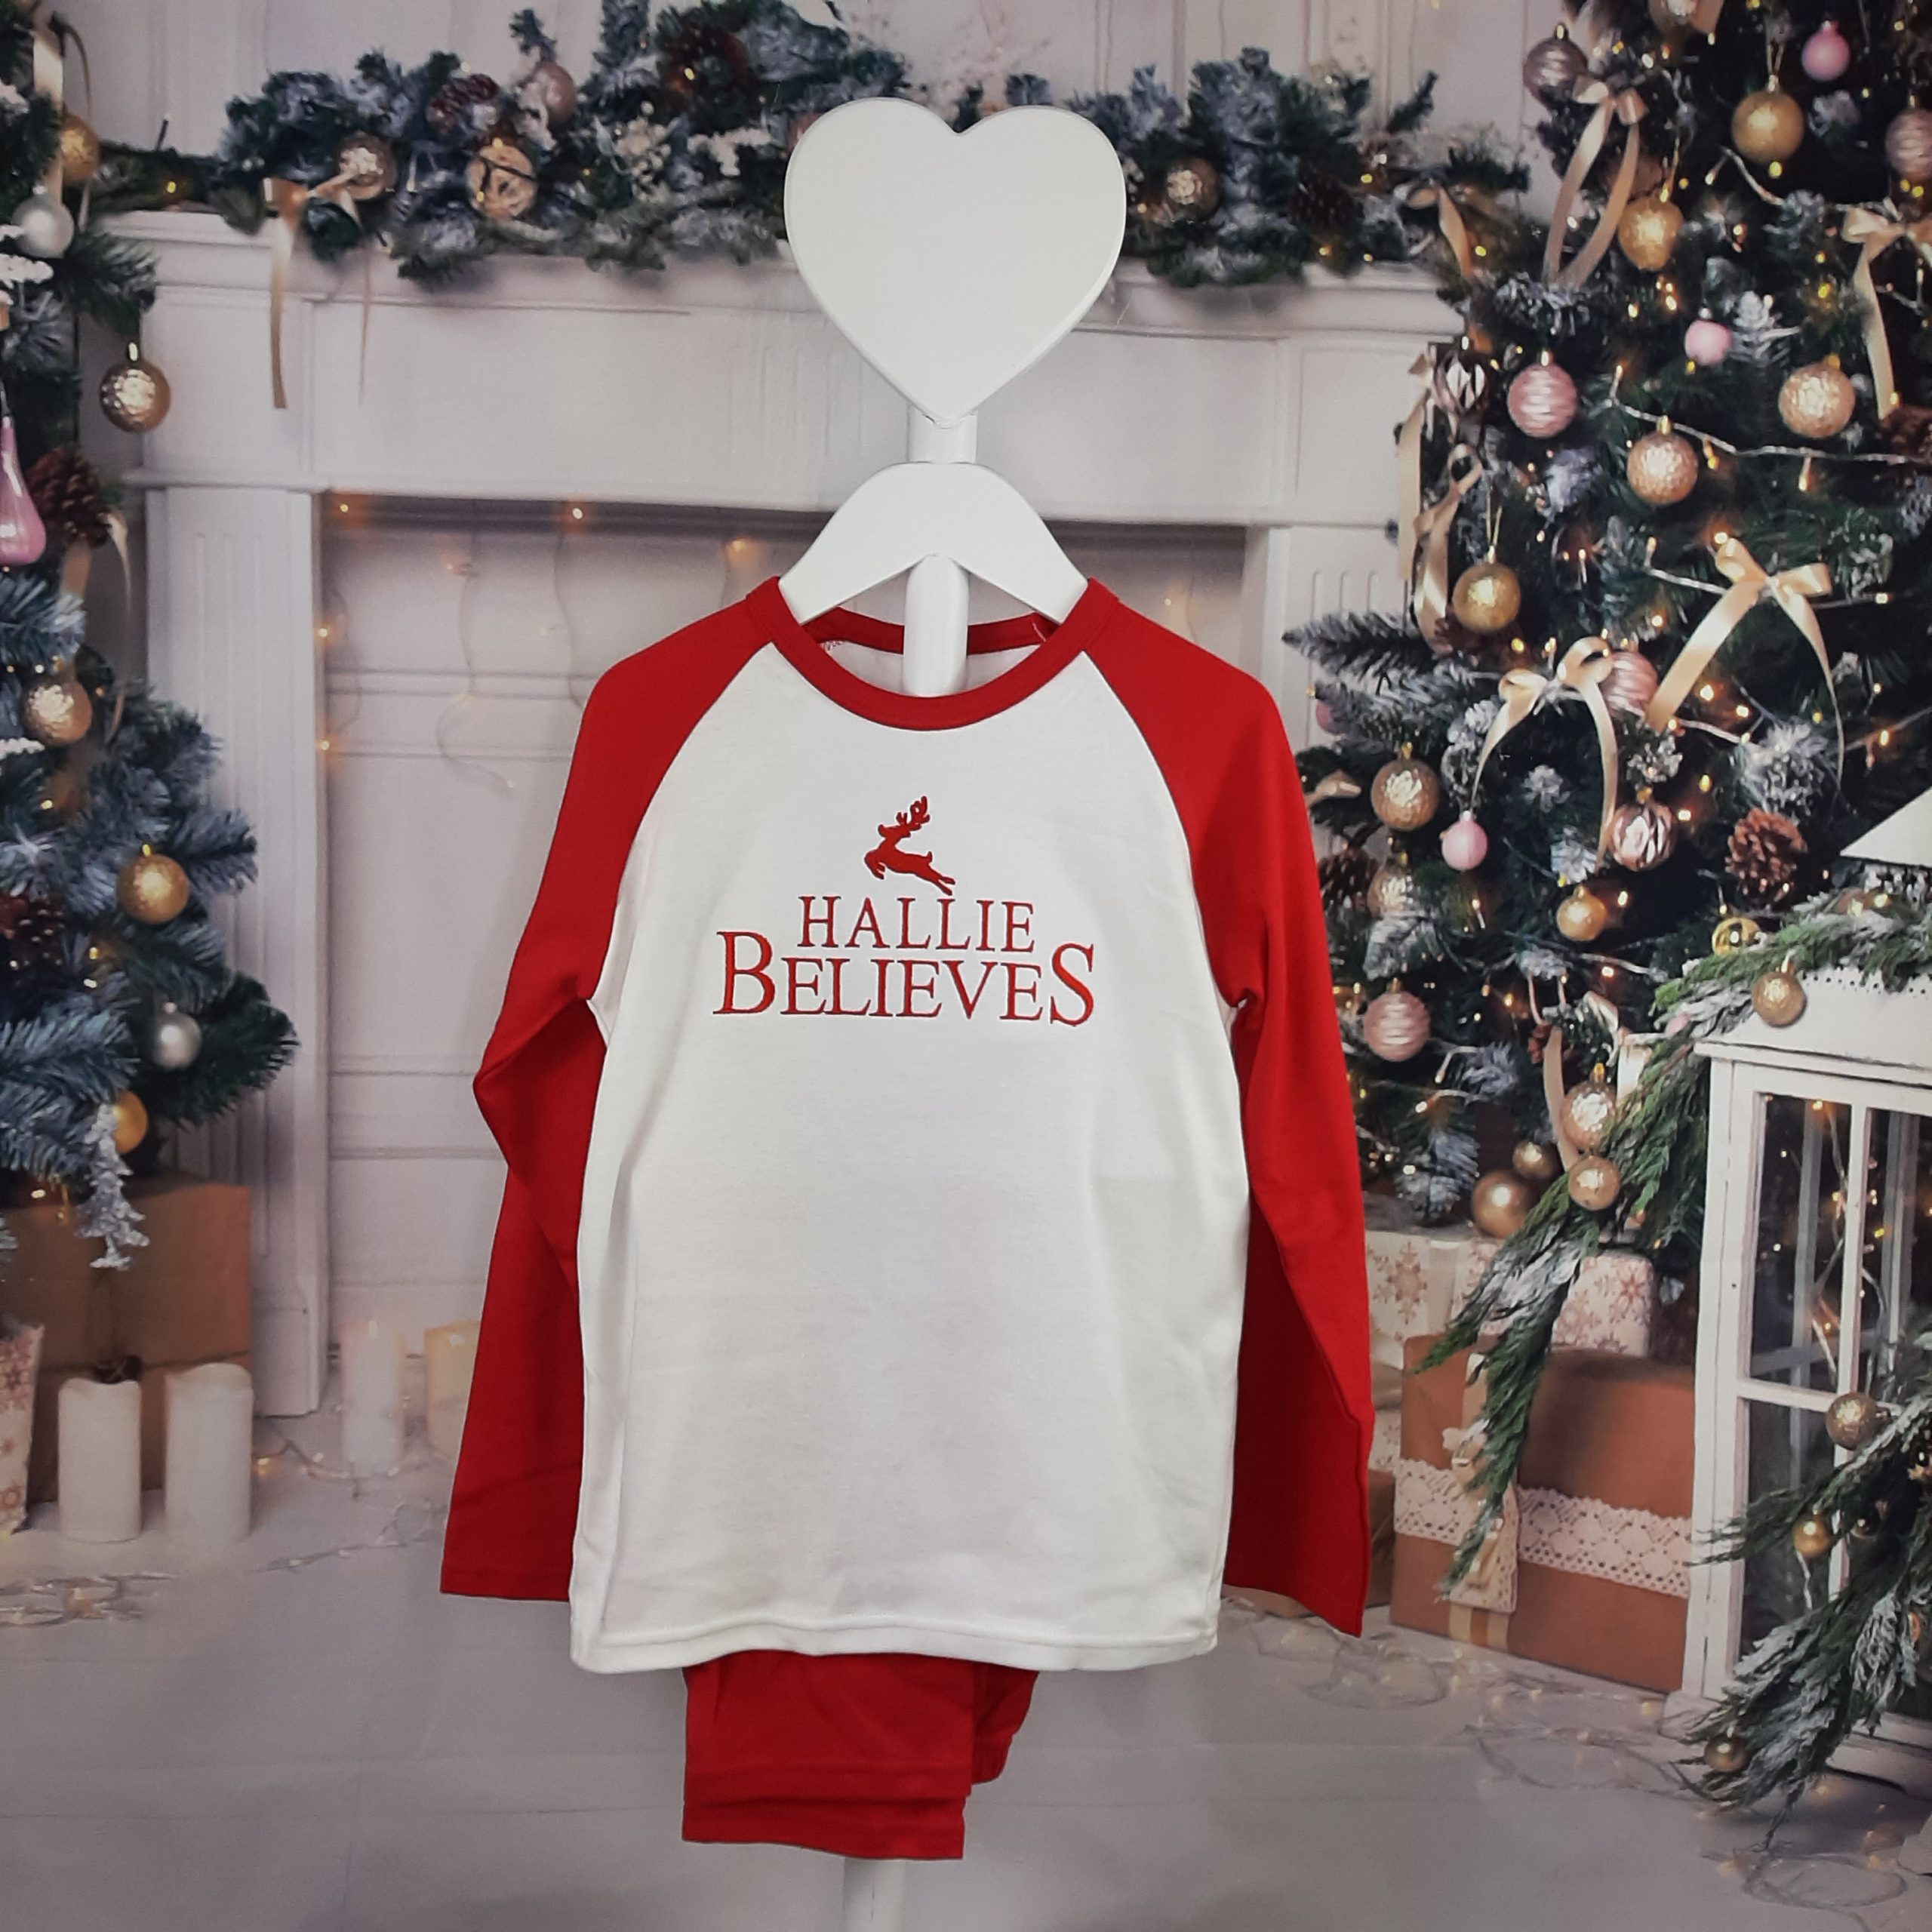 Believes Christmas PJs in red and white for christmas professionally embroidered personalisation. hung